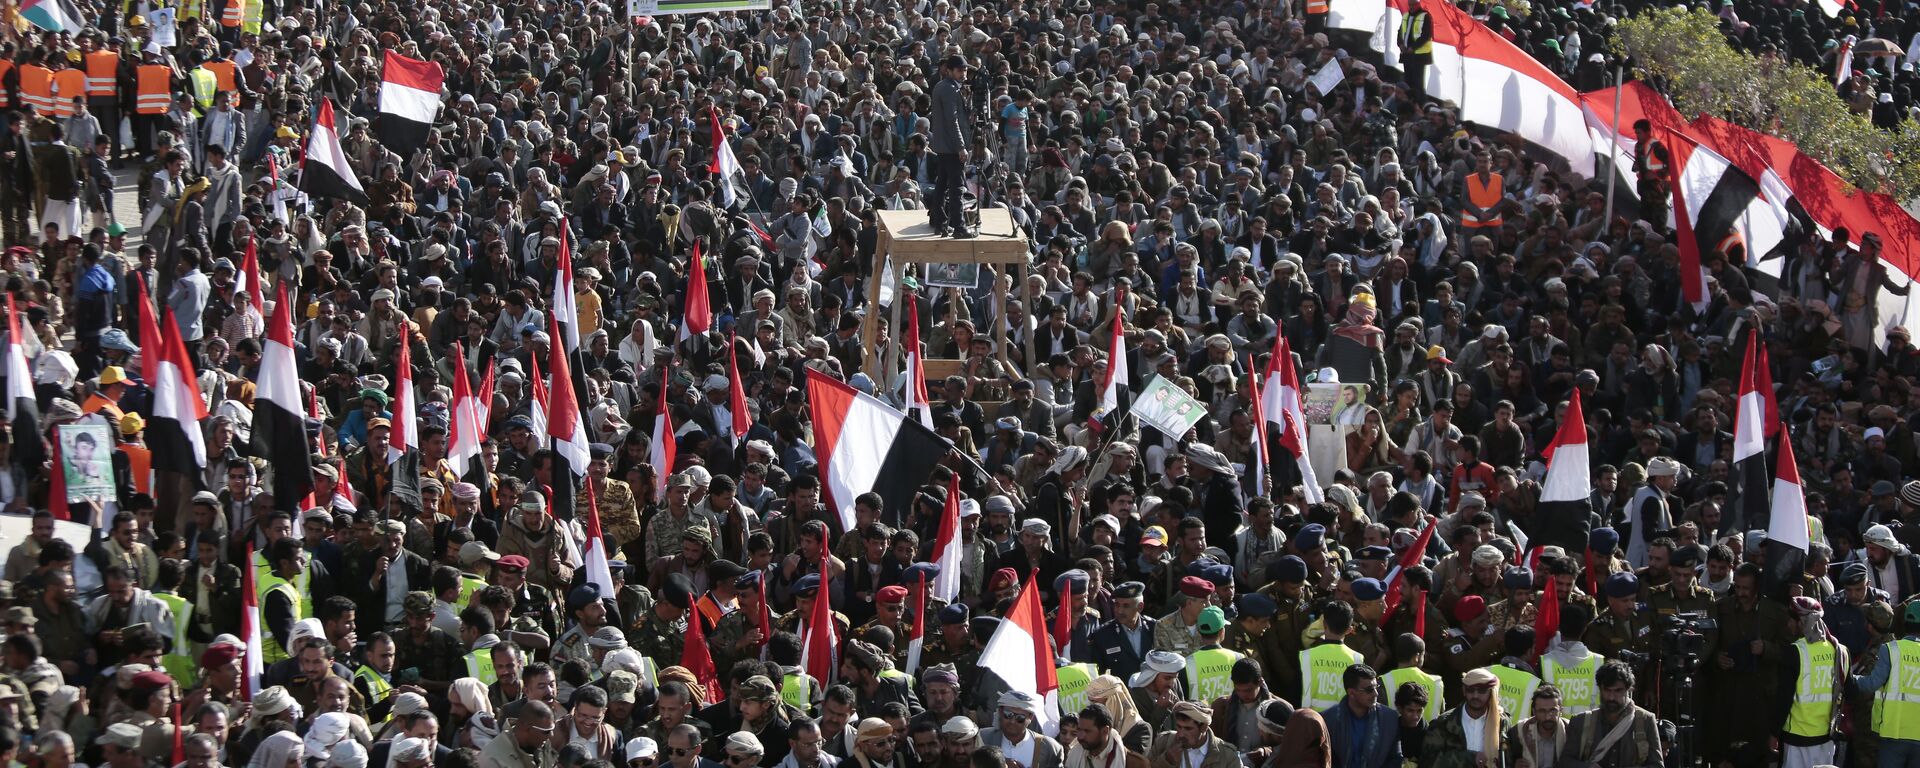 Supporters of Shiite Houthi rebels attend a rally in Sanaa, Yemen, Tuesday, Dec. 5, 2017. The killing of Yemen's ex-President Ali Abdullah Saleh by the country's Shiite rebels on Monday, as their alliance crumbled, has thrown the nearly three-year civil war into unpredictable new chaos. - Sputnik International, 1920, 20.12.2023